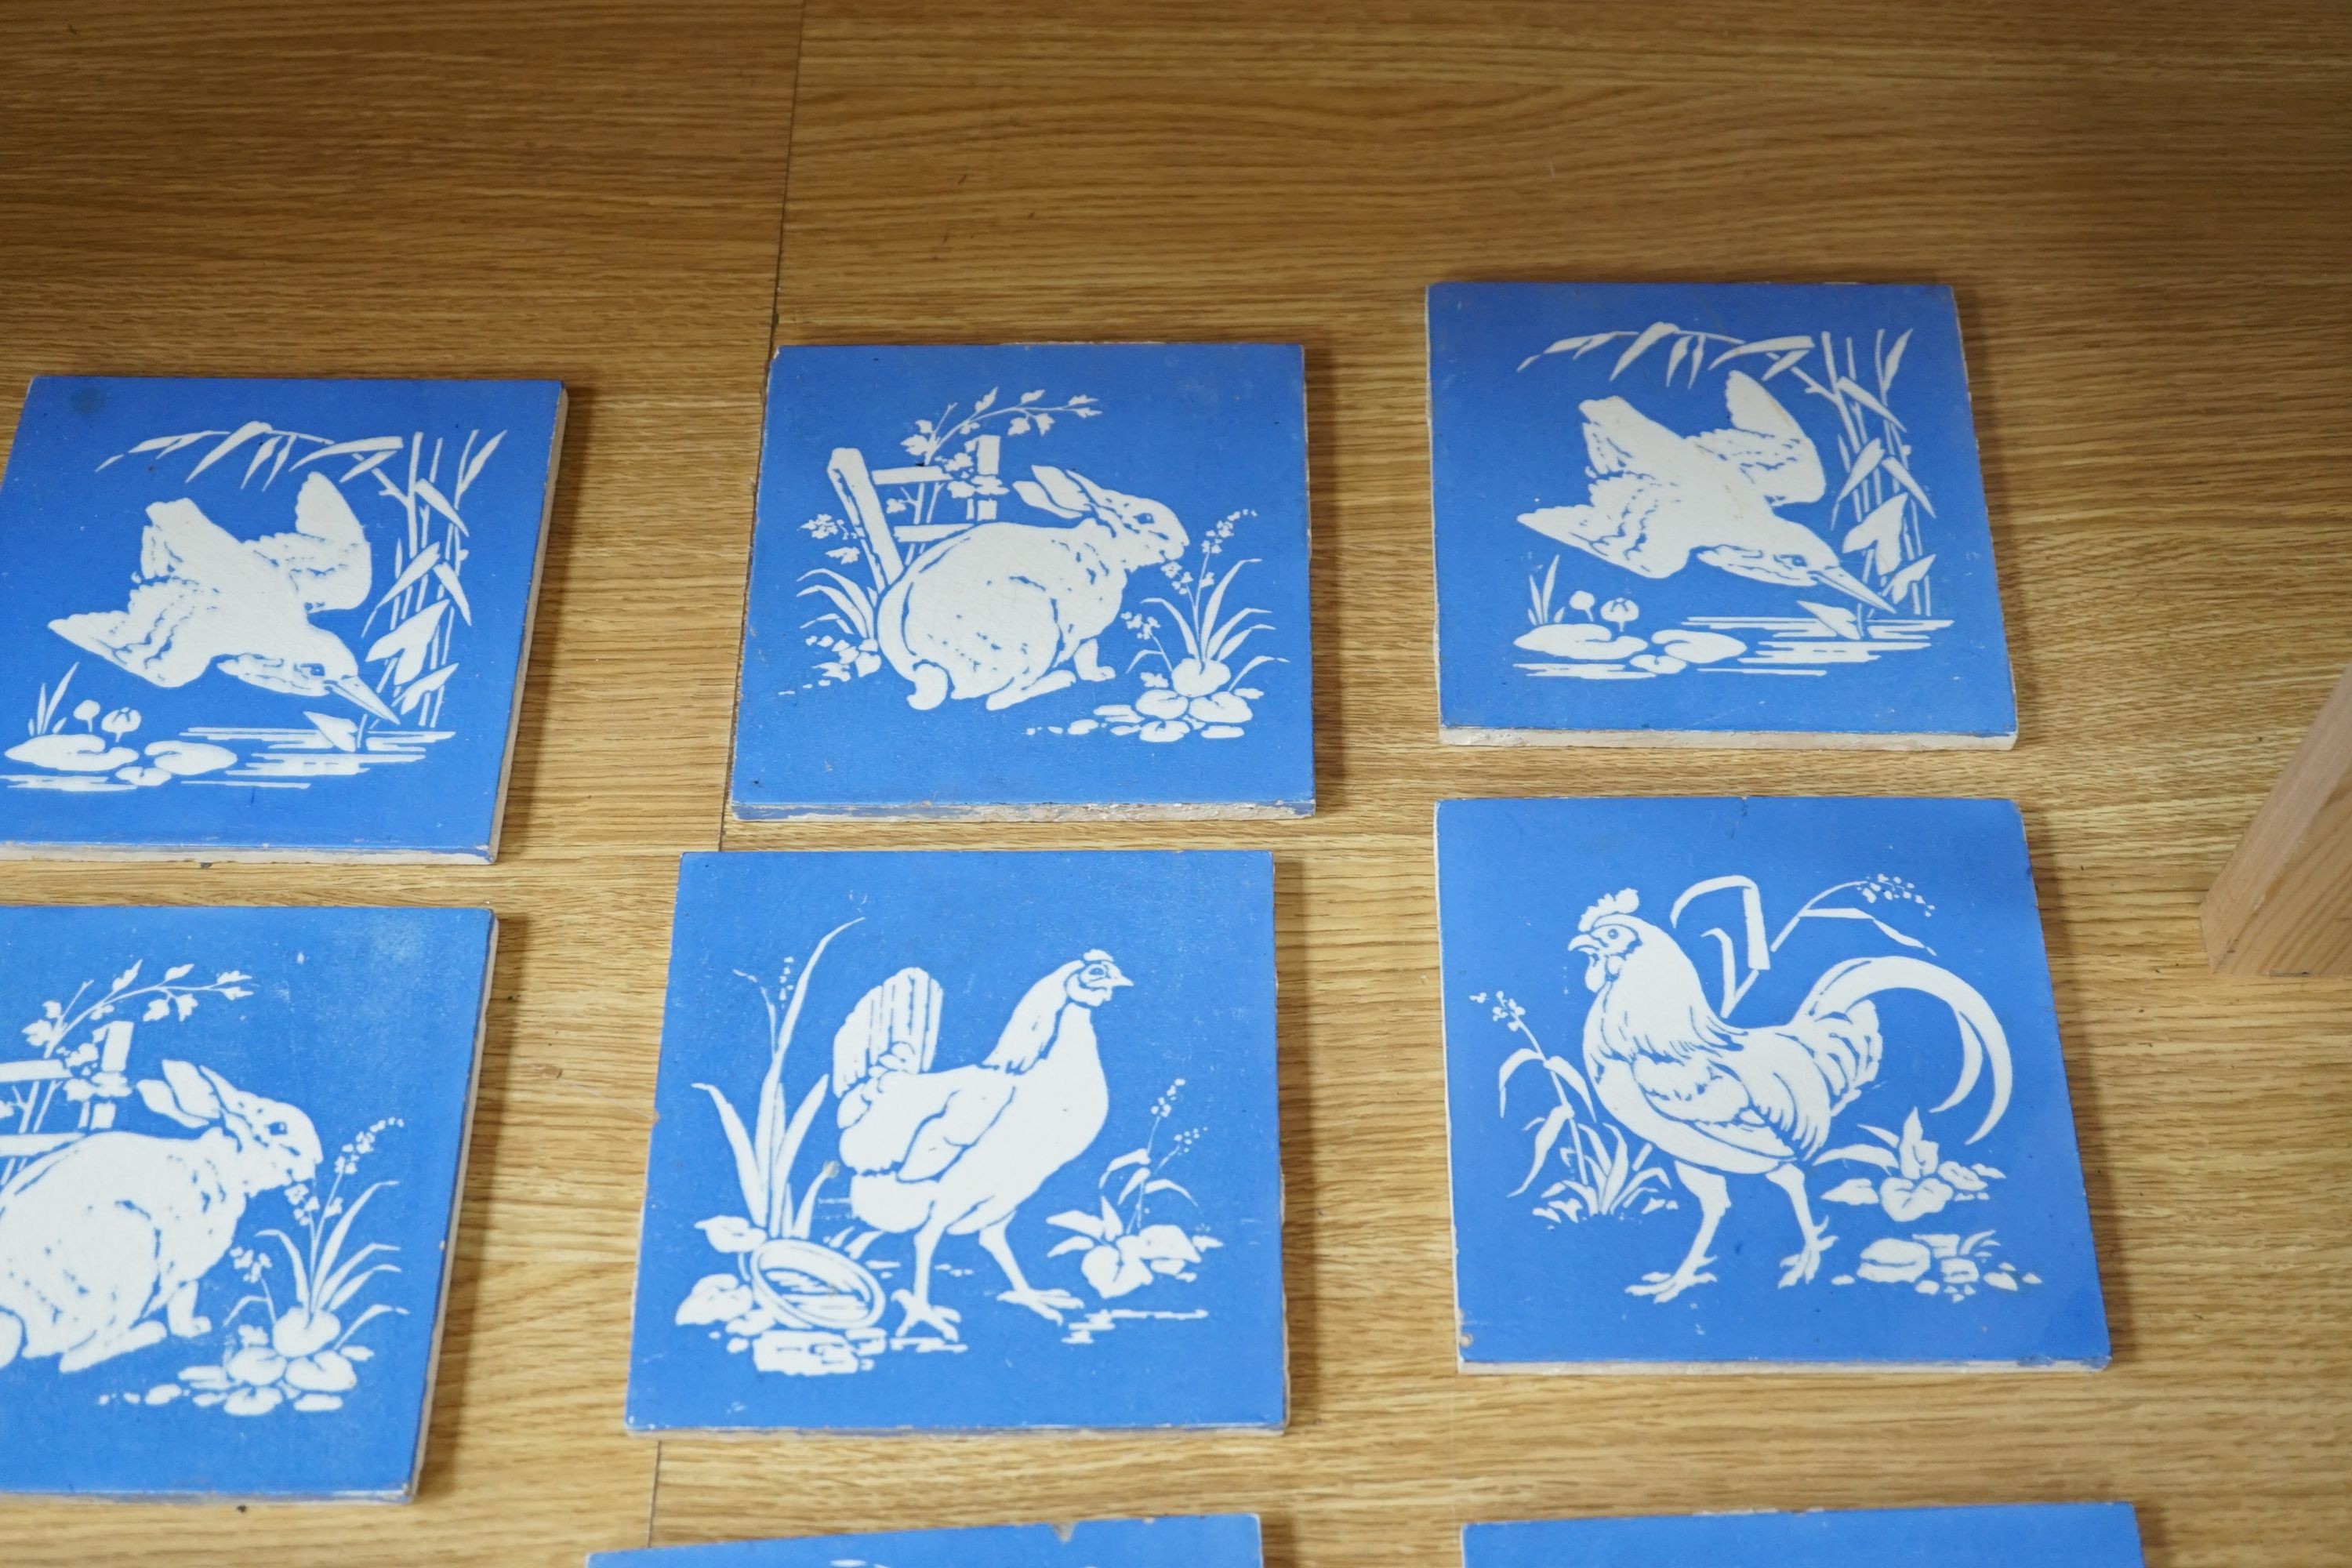 A collection of twelve Mintons China Works blue and white bird tiles, 15cms x 15cms square (each tile).